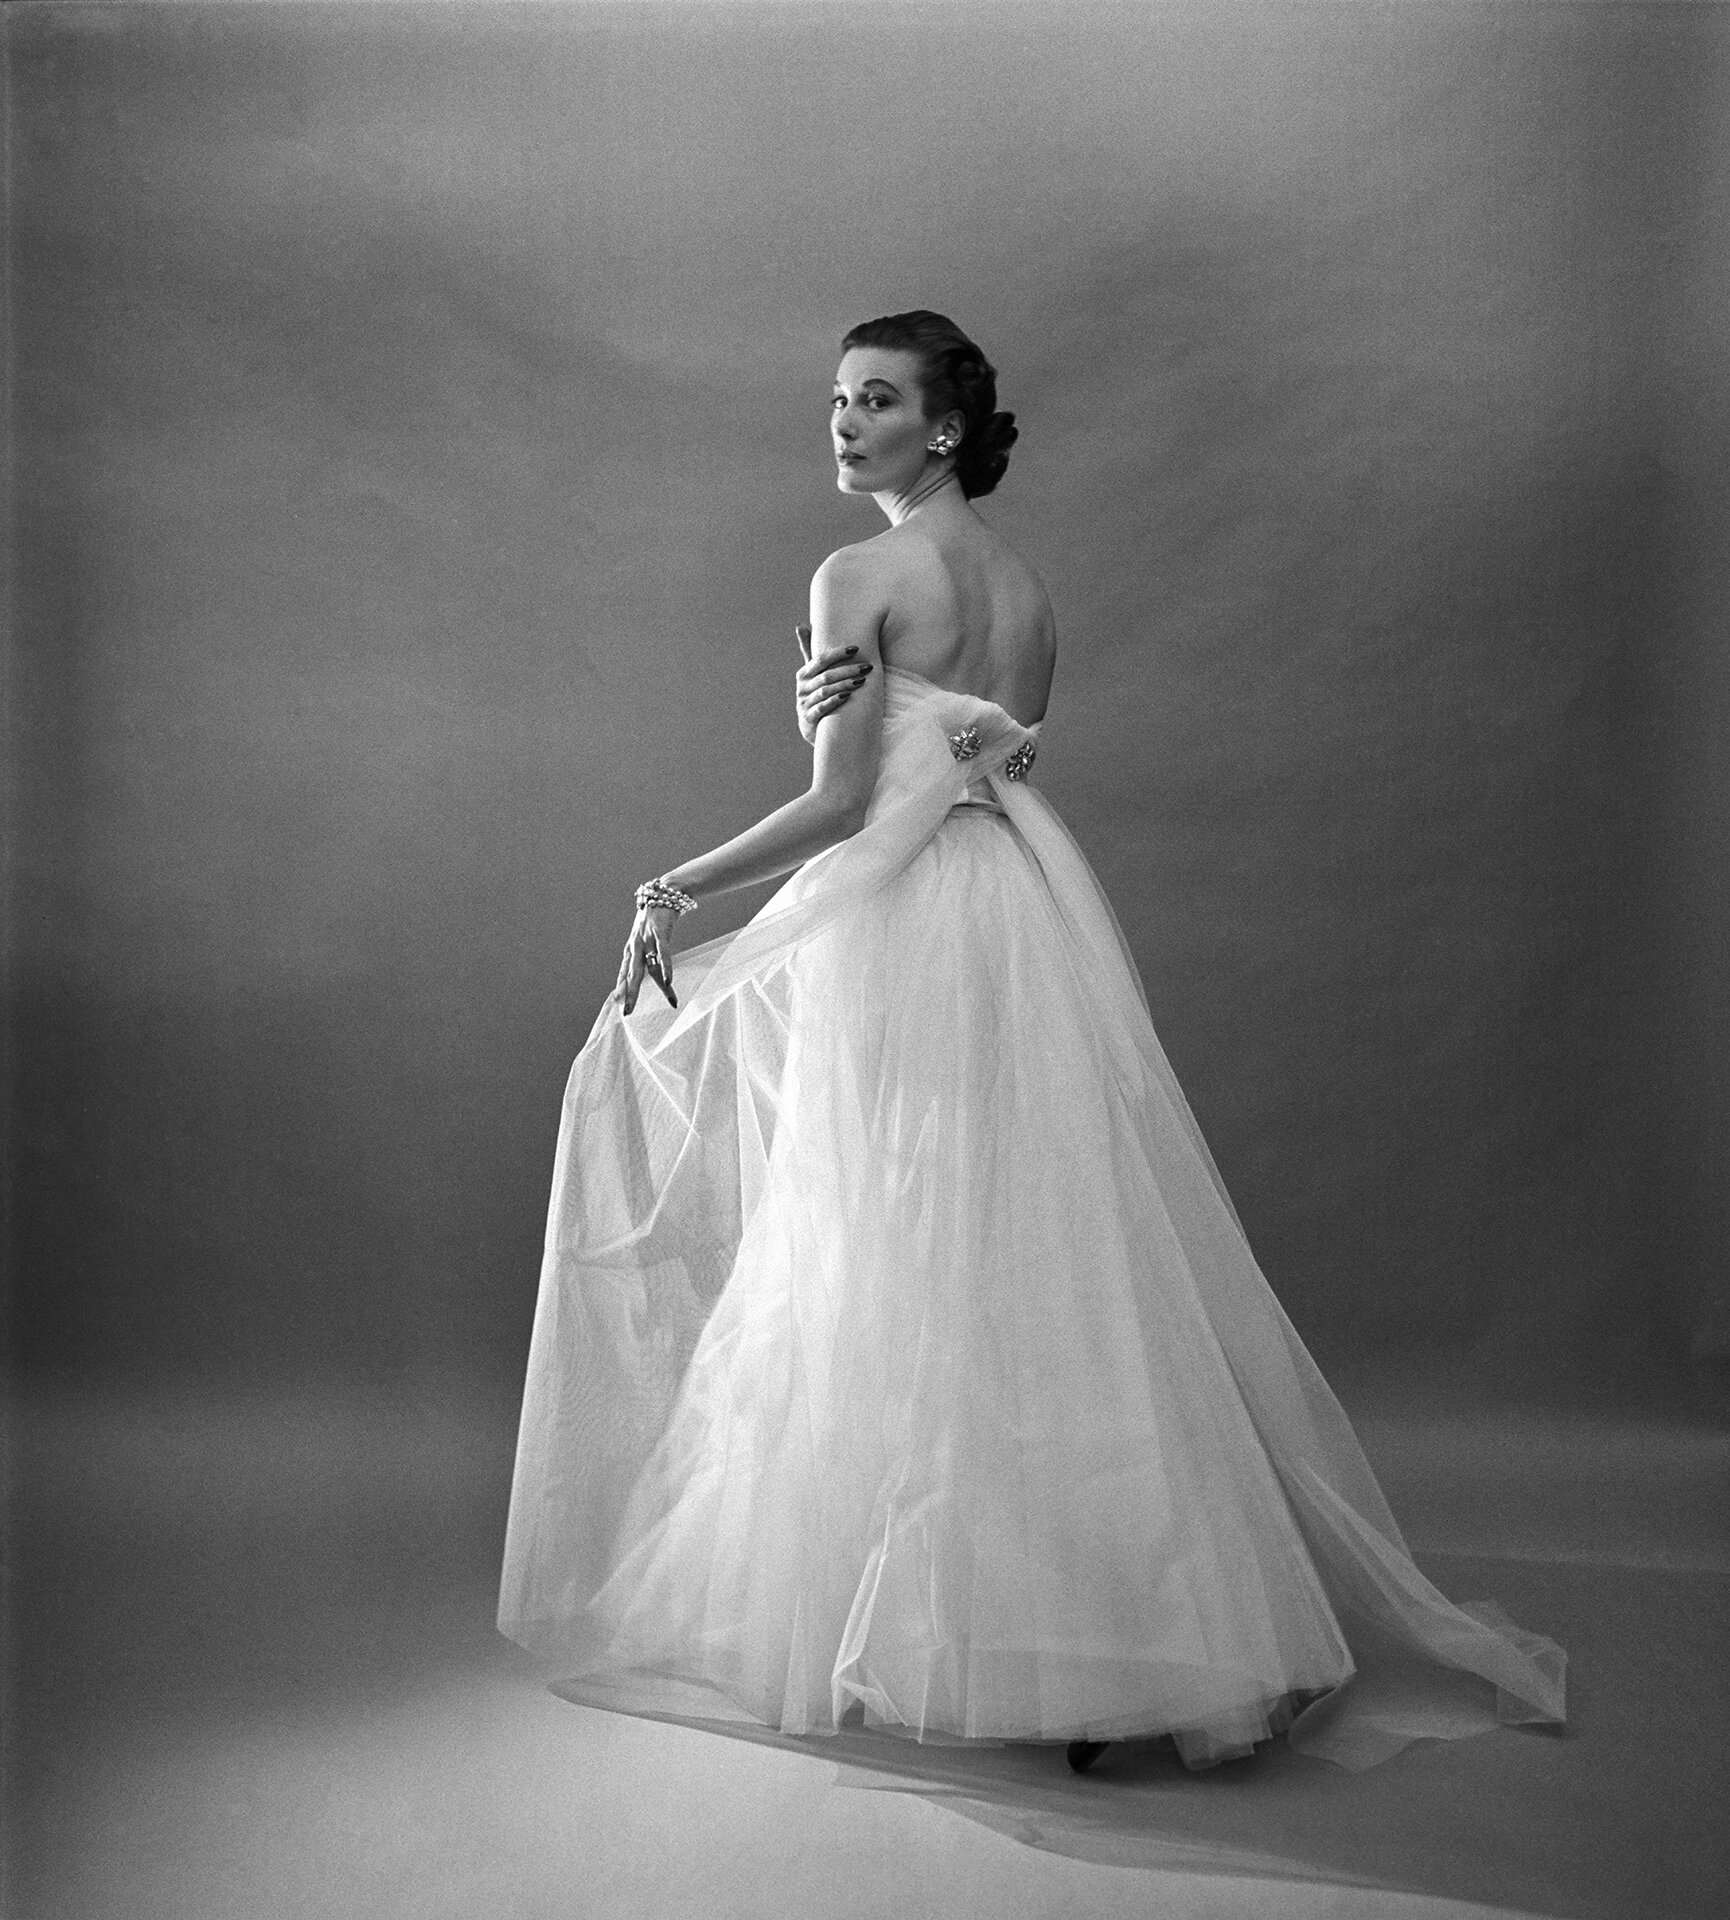 Mary Jane Russell for Flair Magazine, 1951